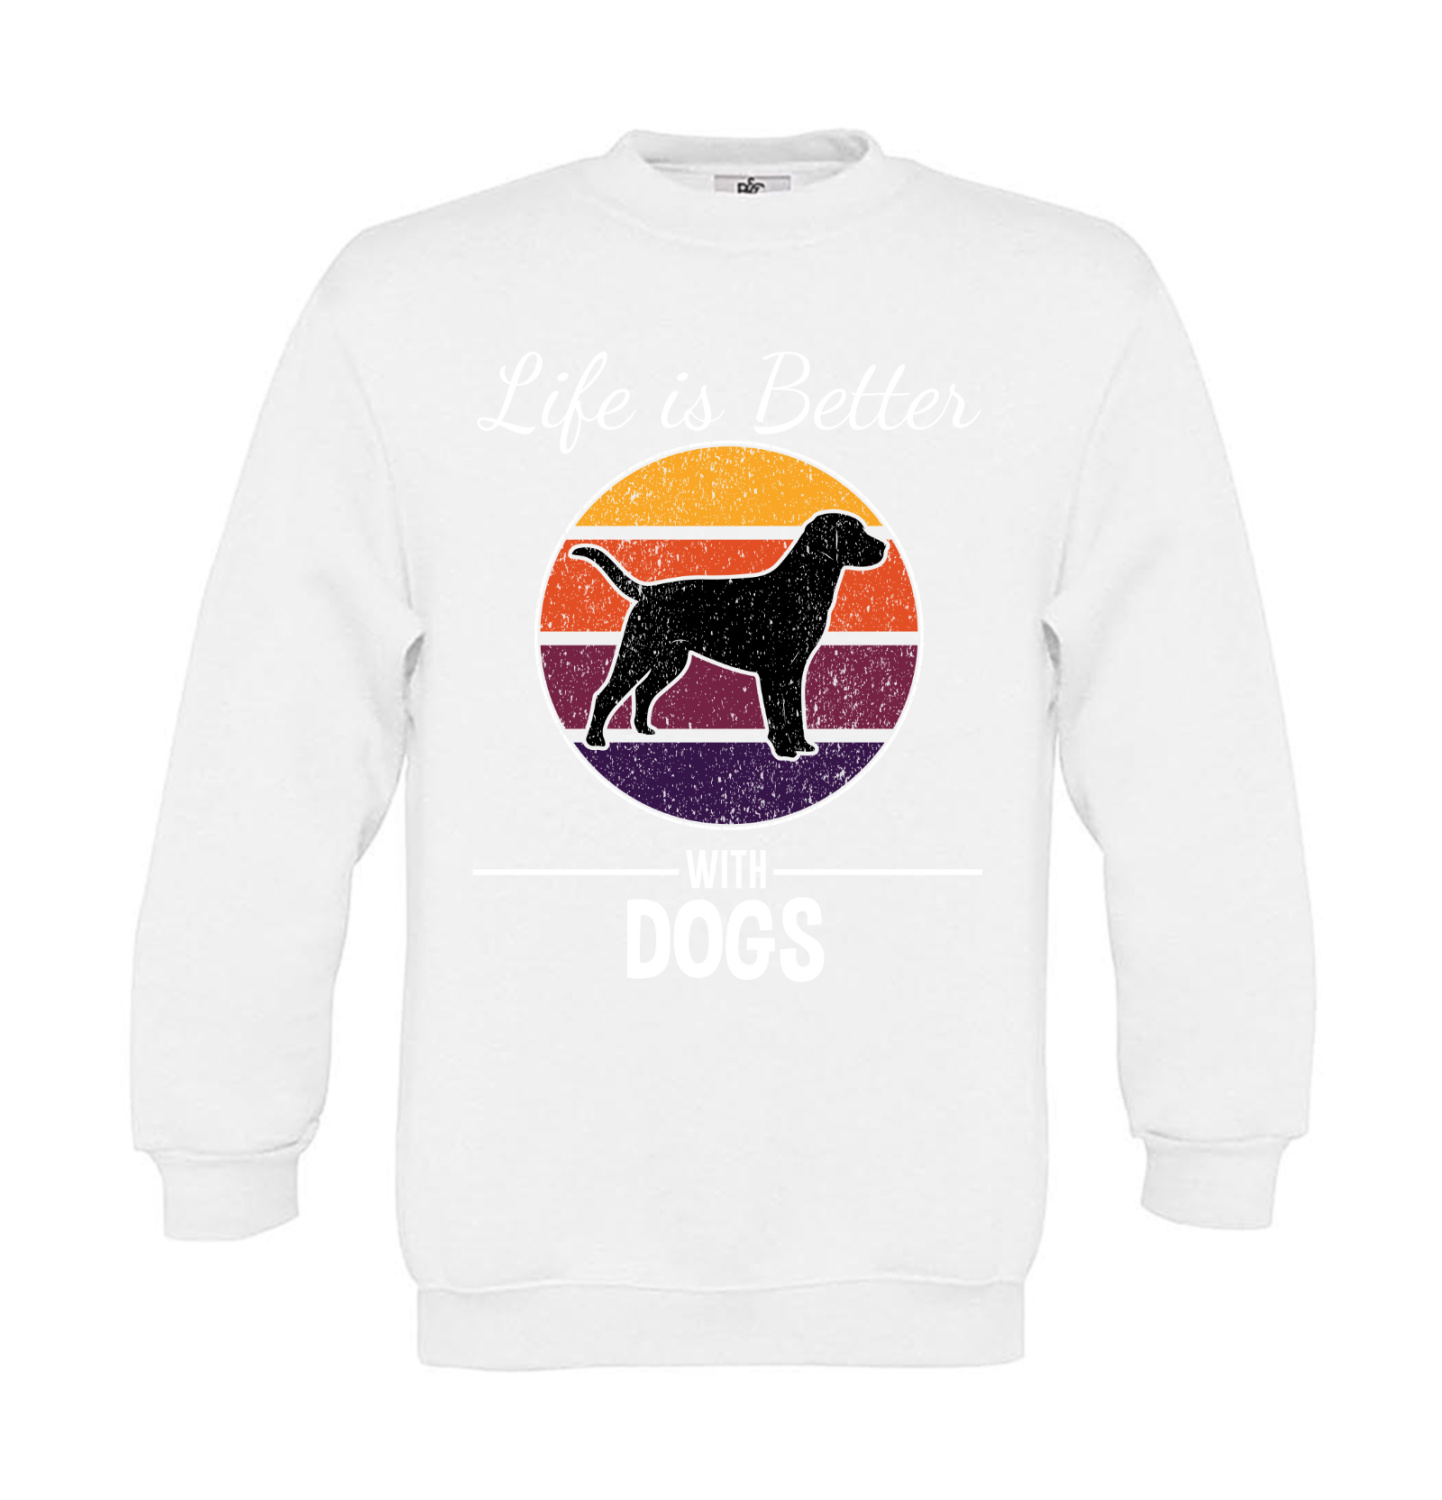 Sweatshirt Kinder Hunde - Life is Better with Dogs